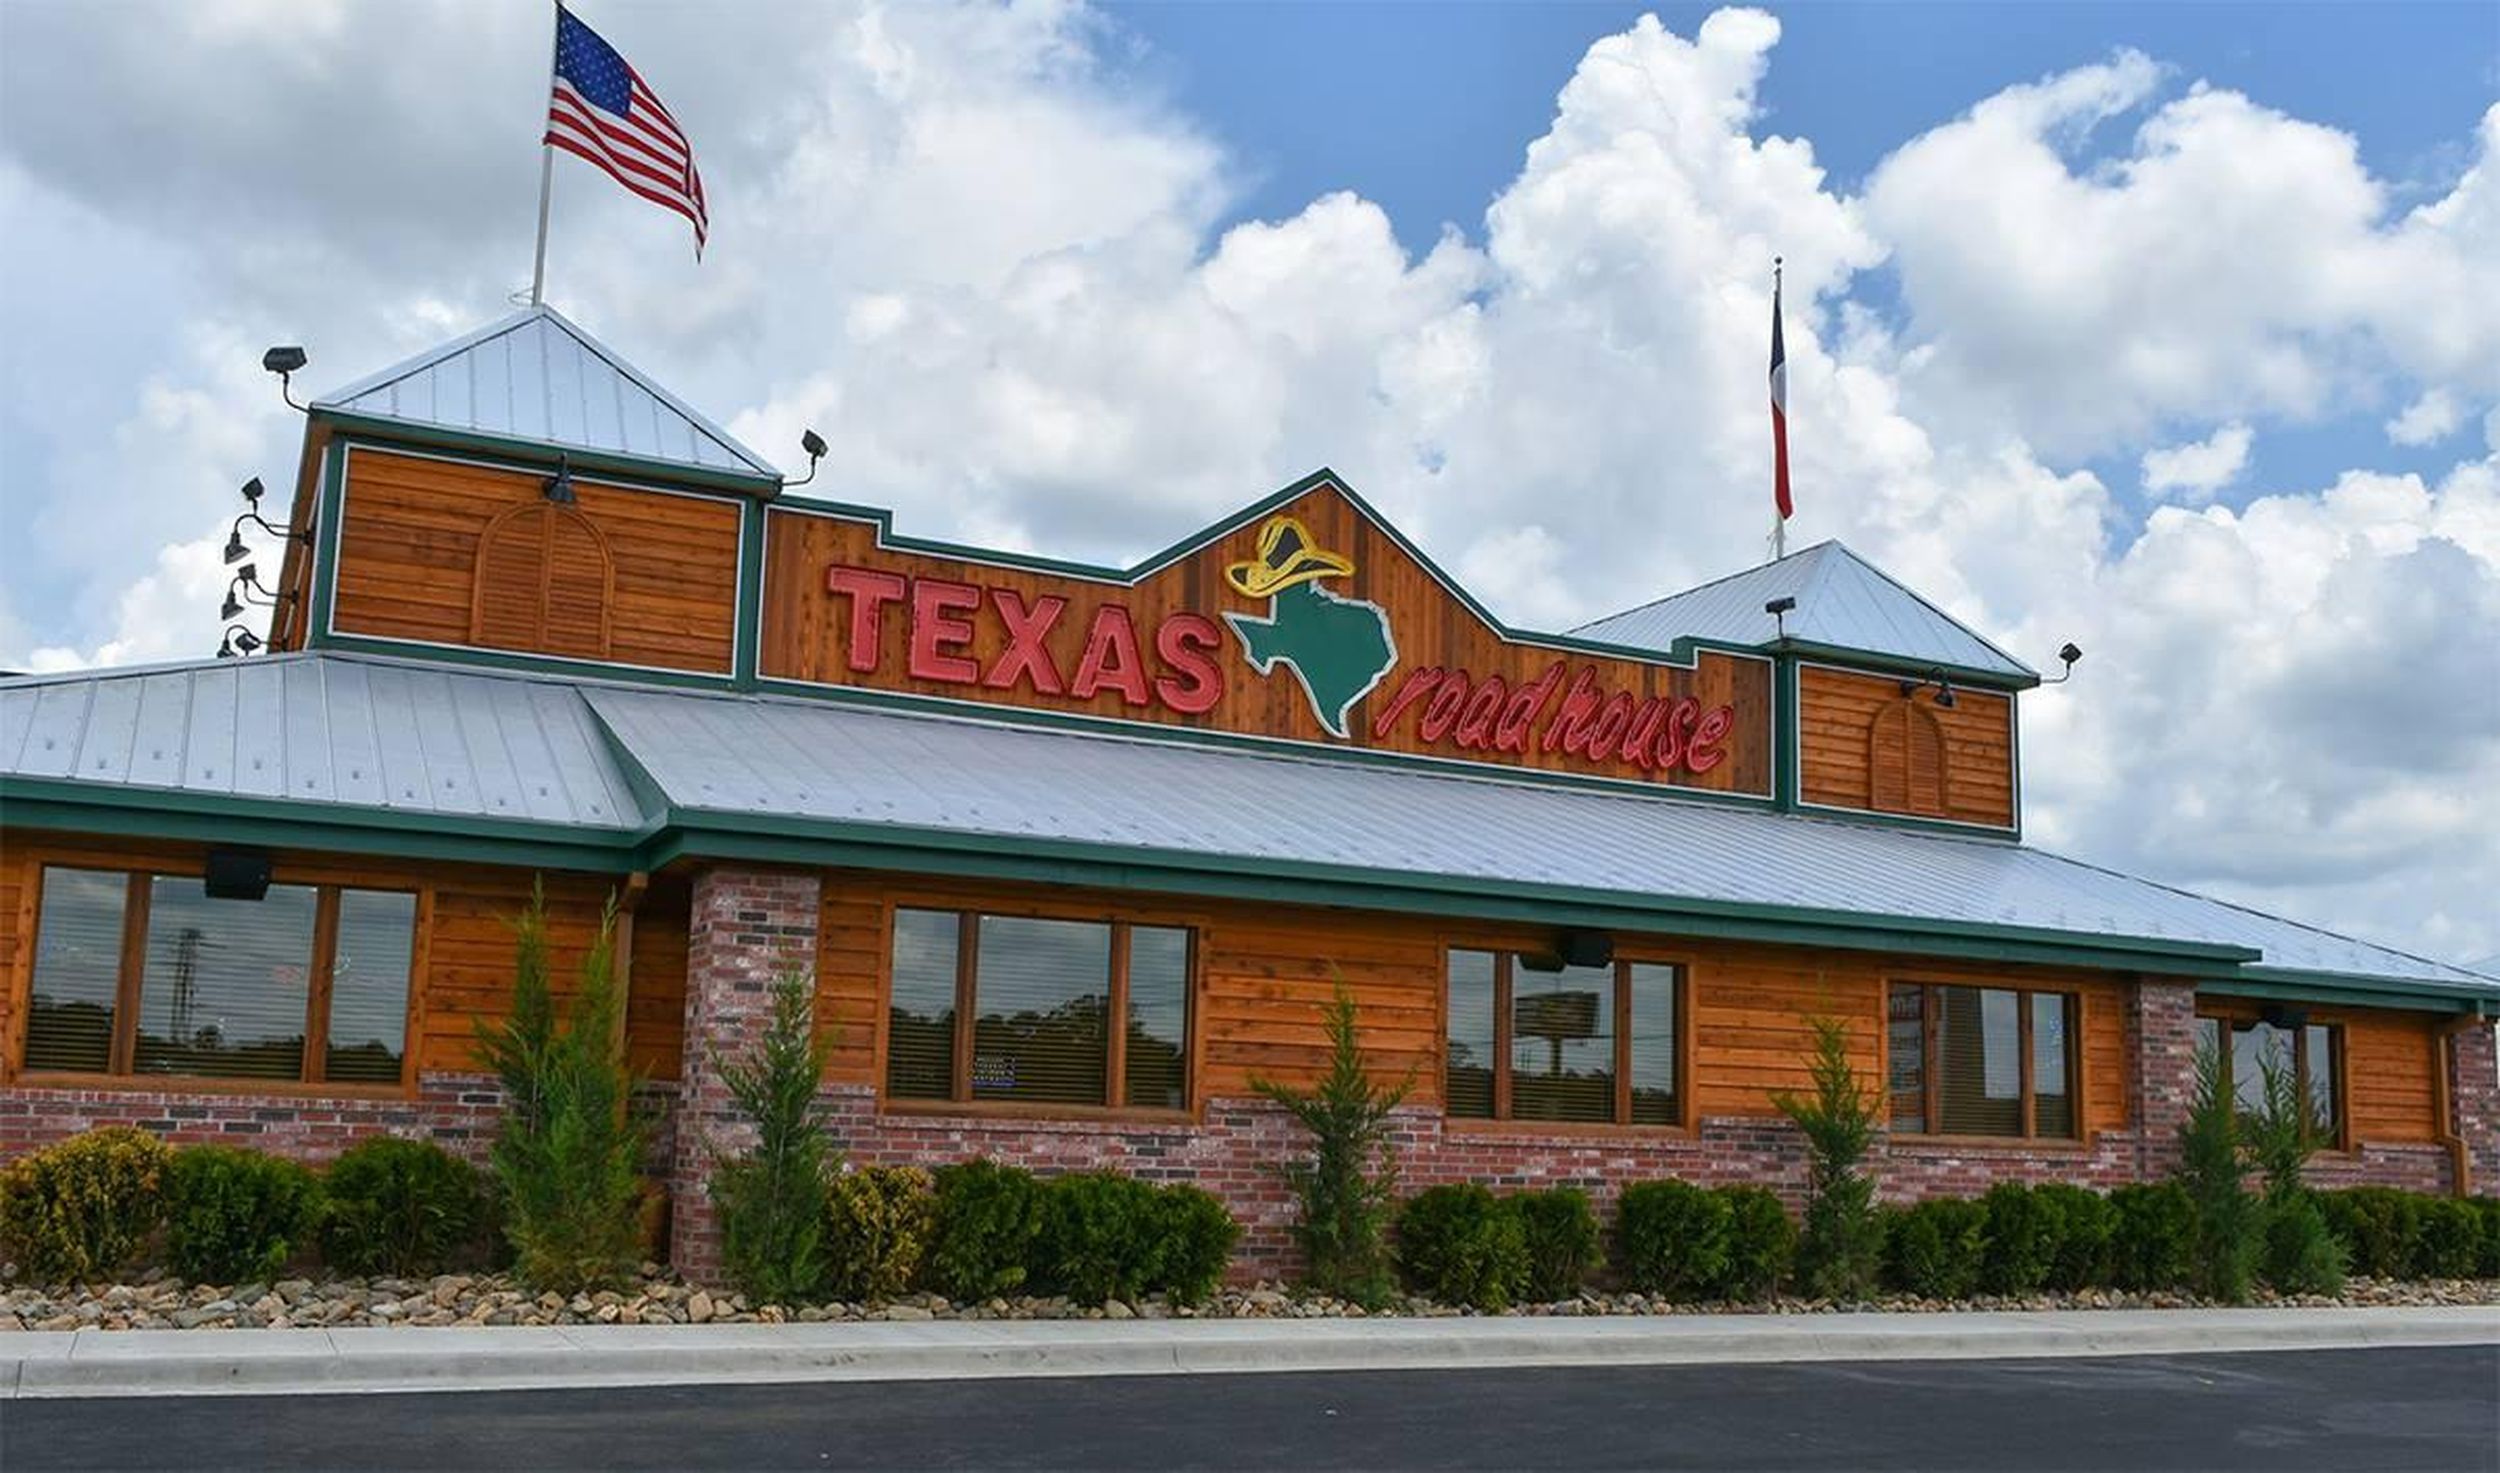 Is Texas Roadhouse Dining Room Open